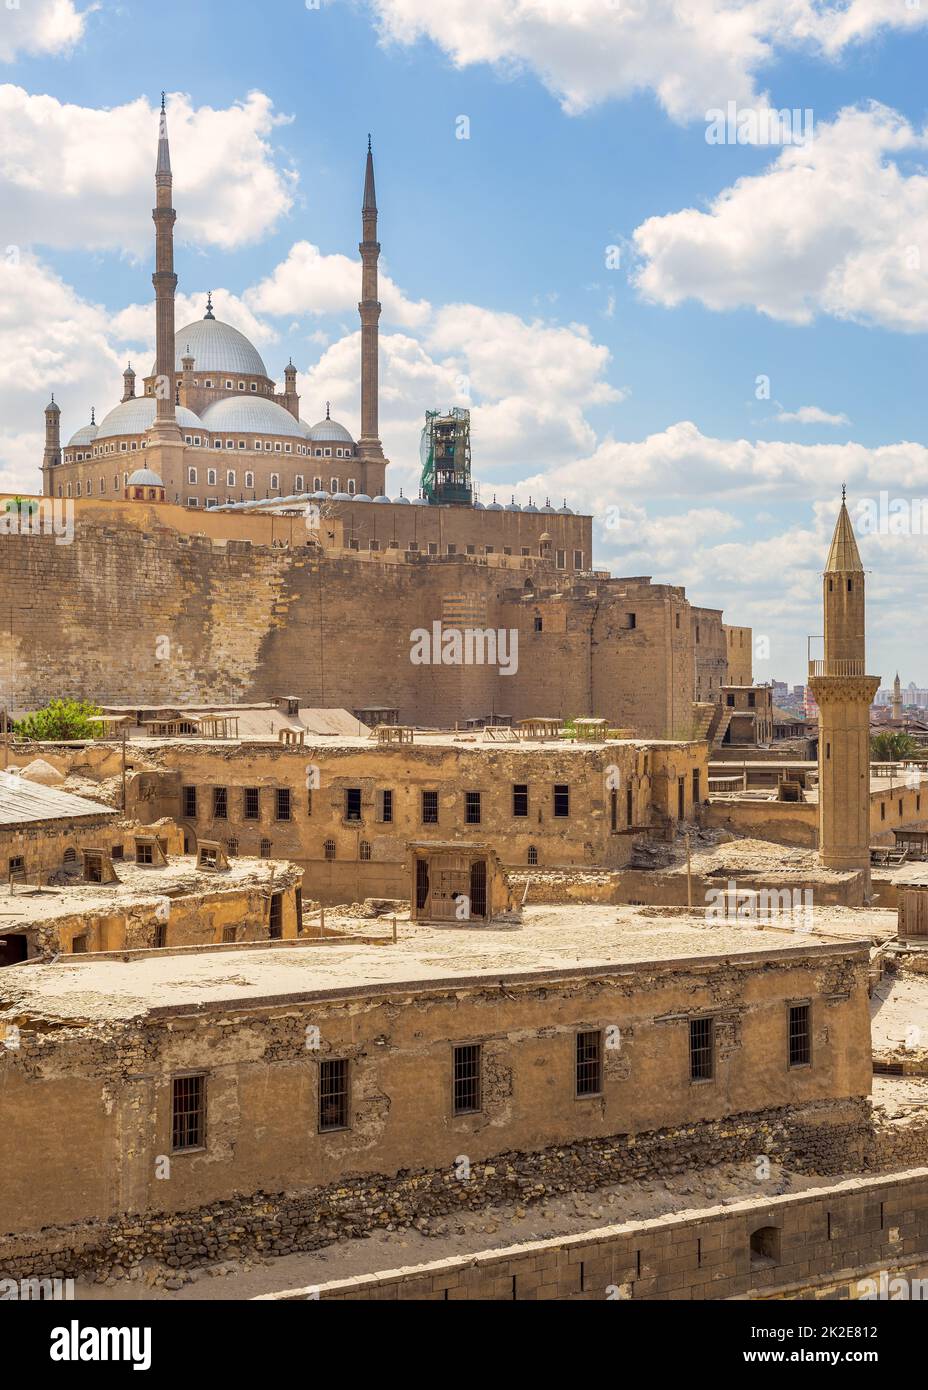 Great Mosque of Muhammad Ali, Citadel of Cairo, one of the landmarks and attractions of Cairo, Egypt Stock Photo